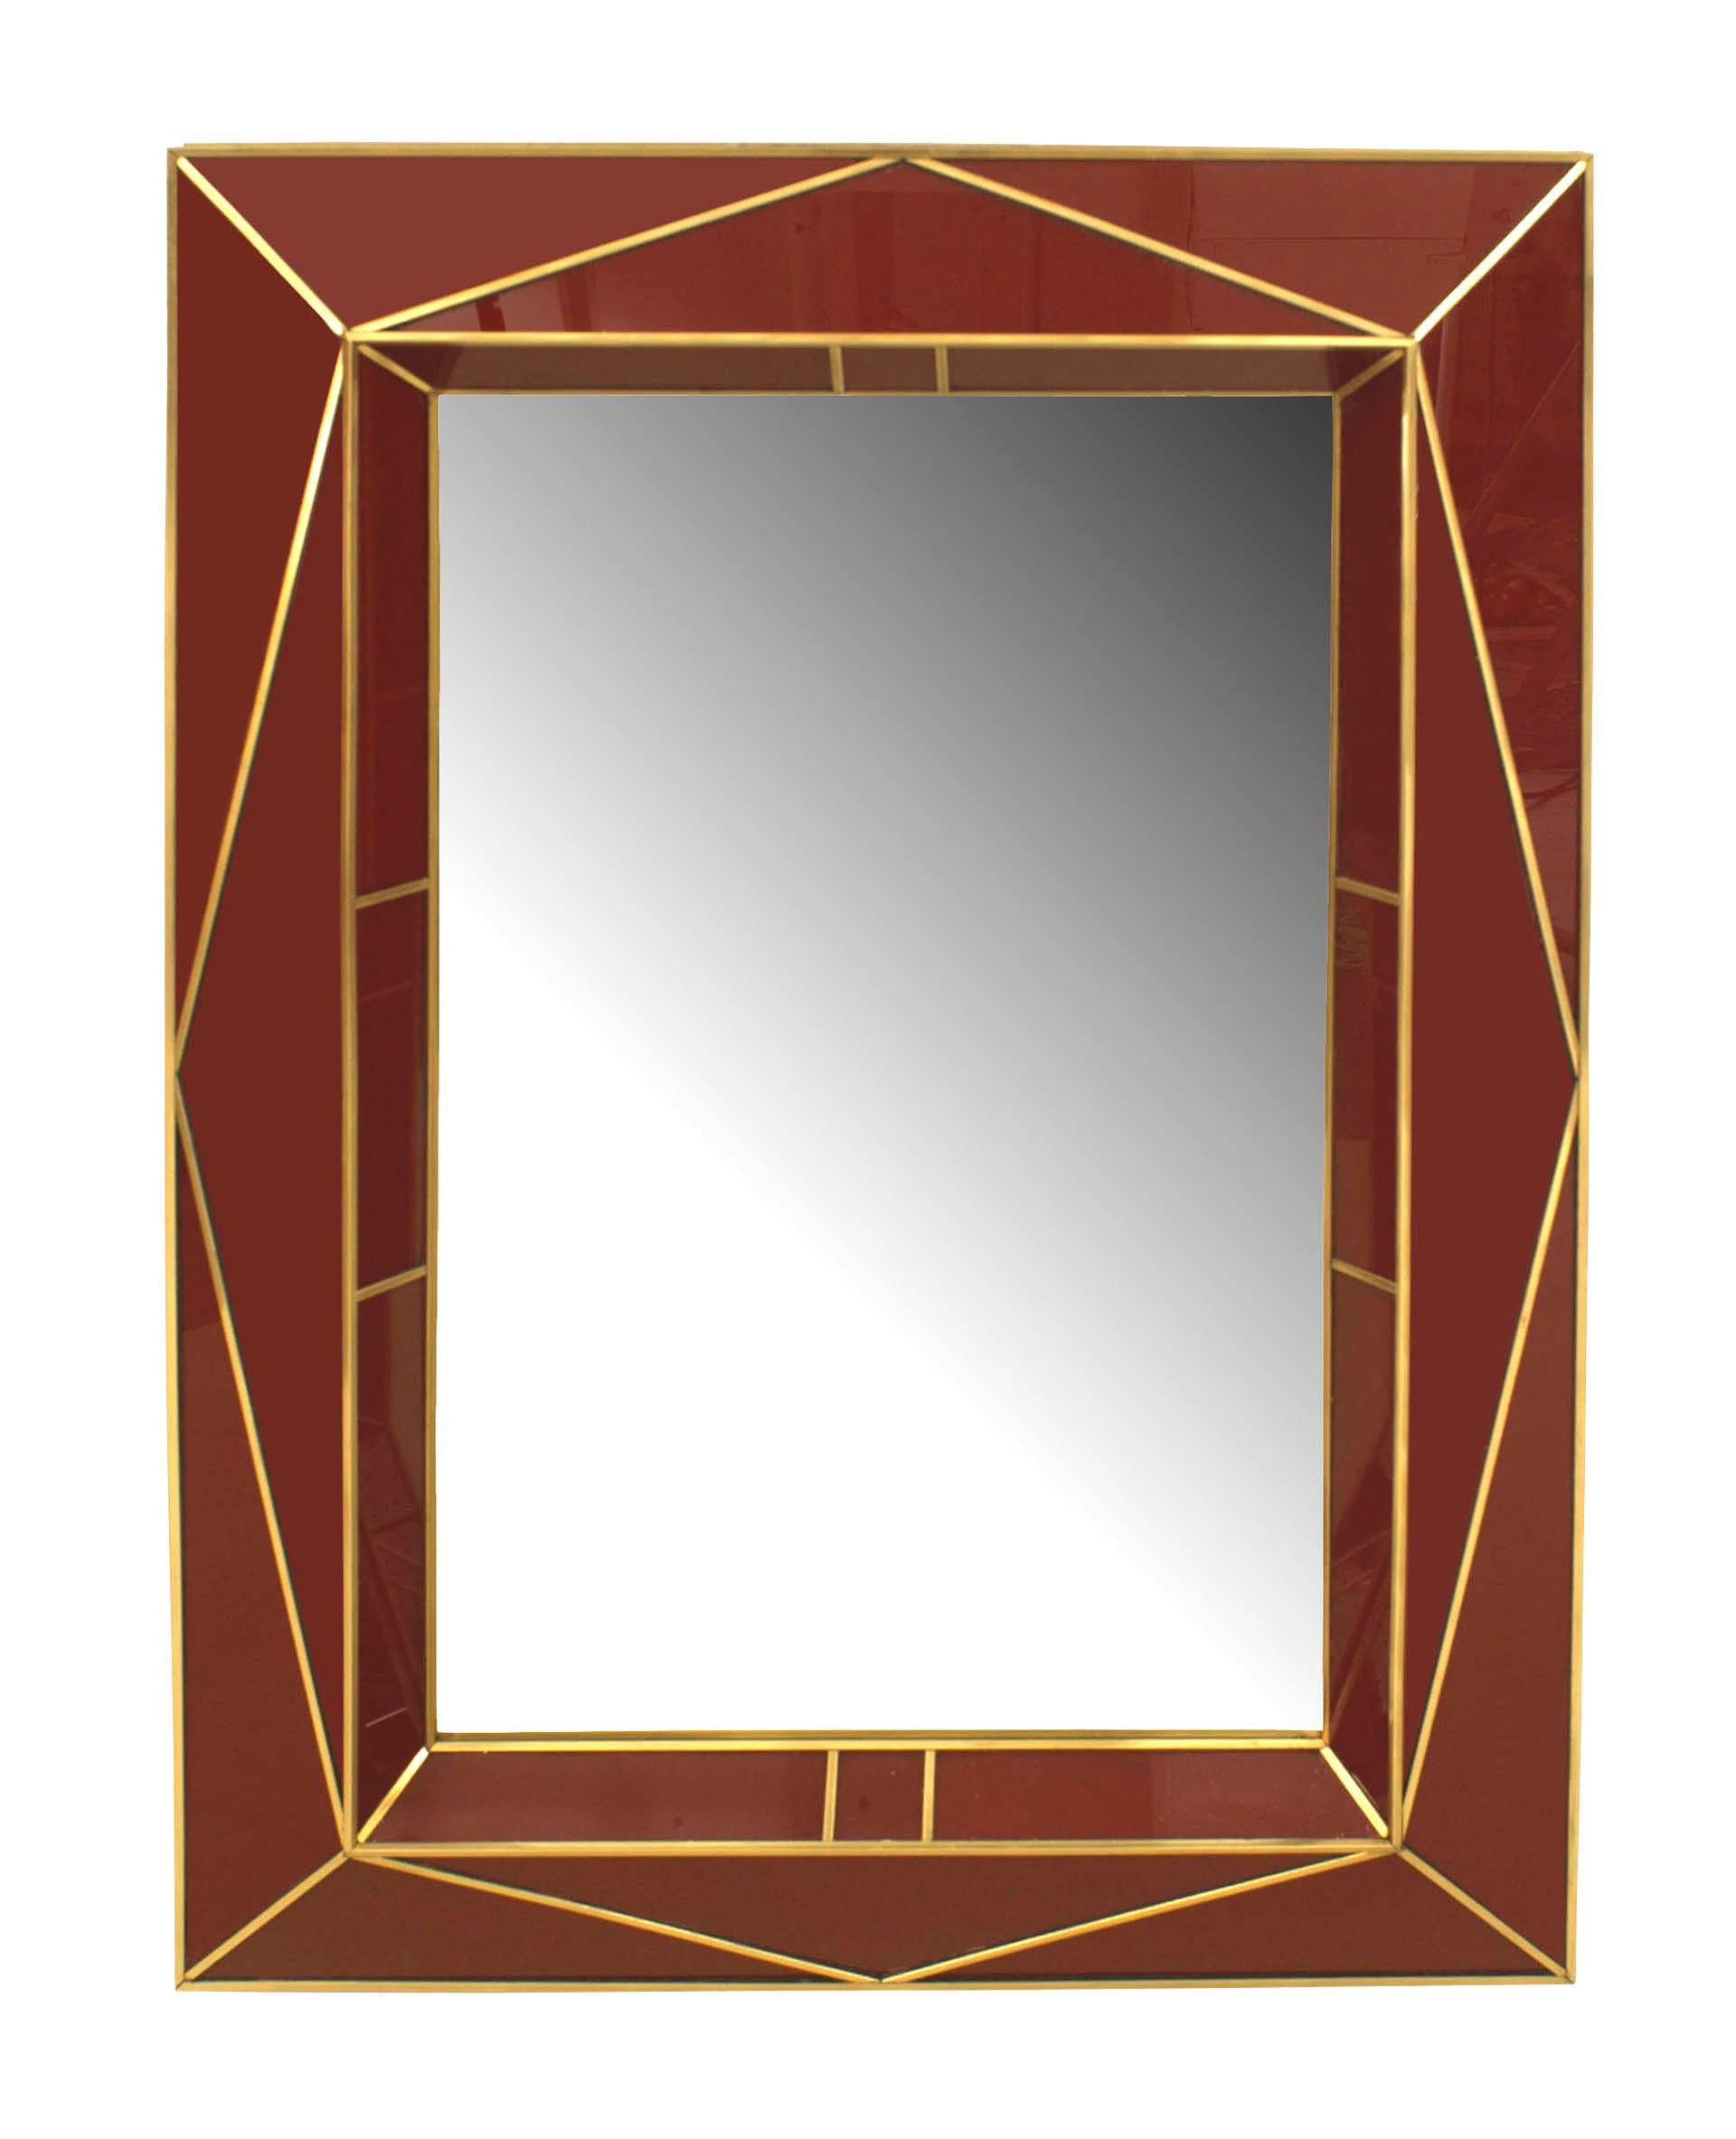 American Modern design wall mirror with red colored geometric faceted glass frame with brass inlay. Color and size can be customized, please inquire. 